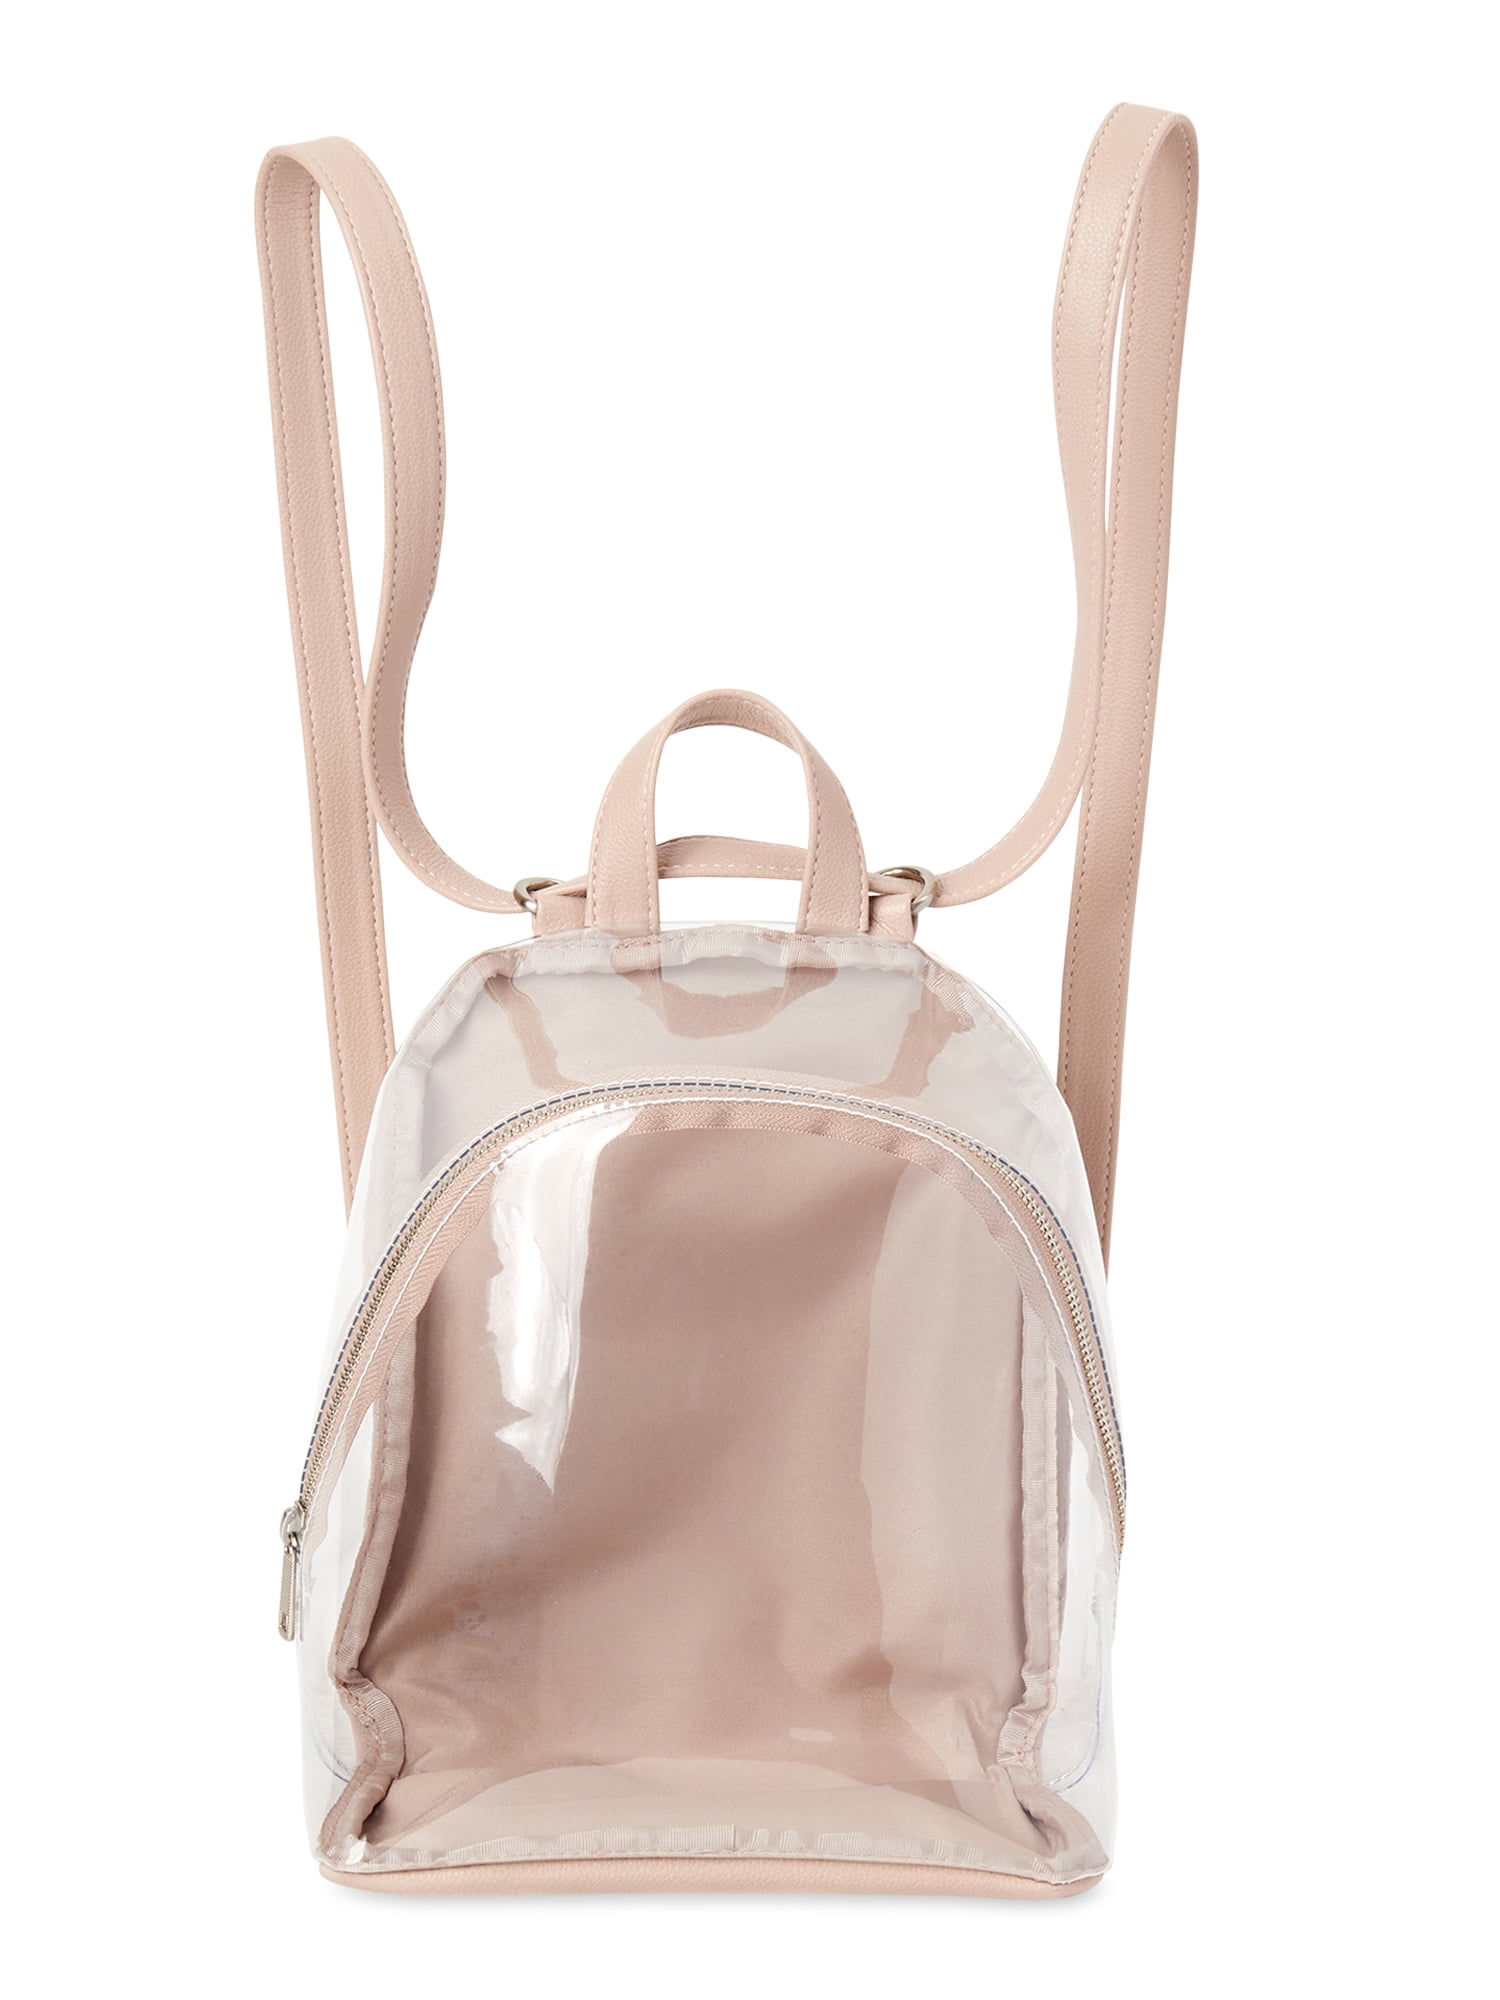 Small Backpack - White/transparent - Ladies